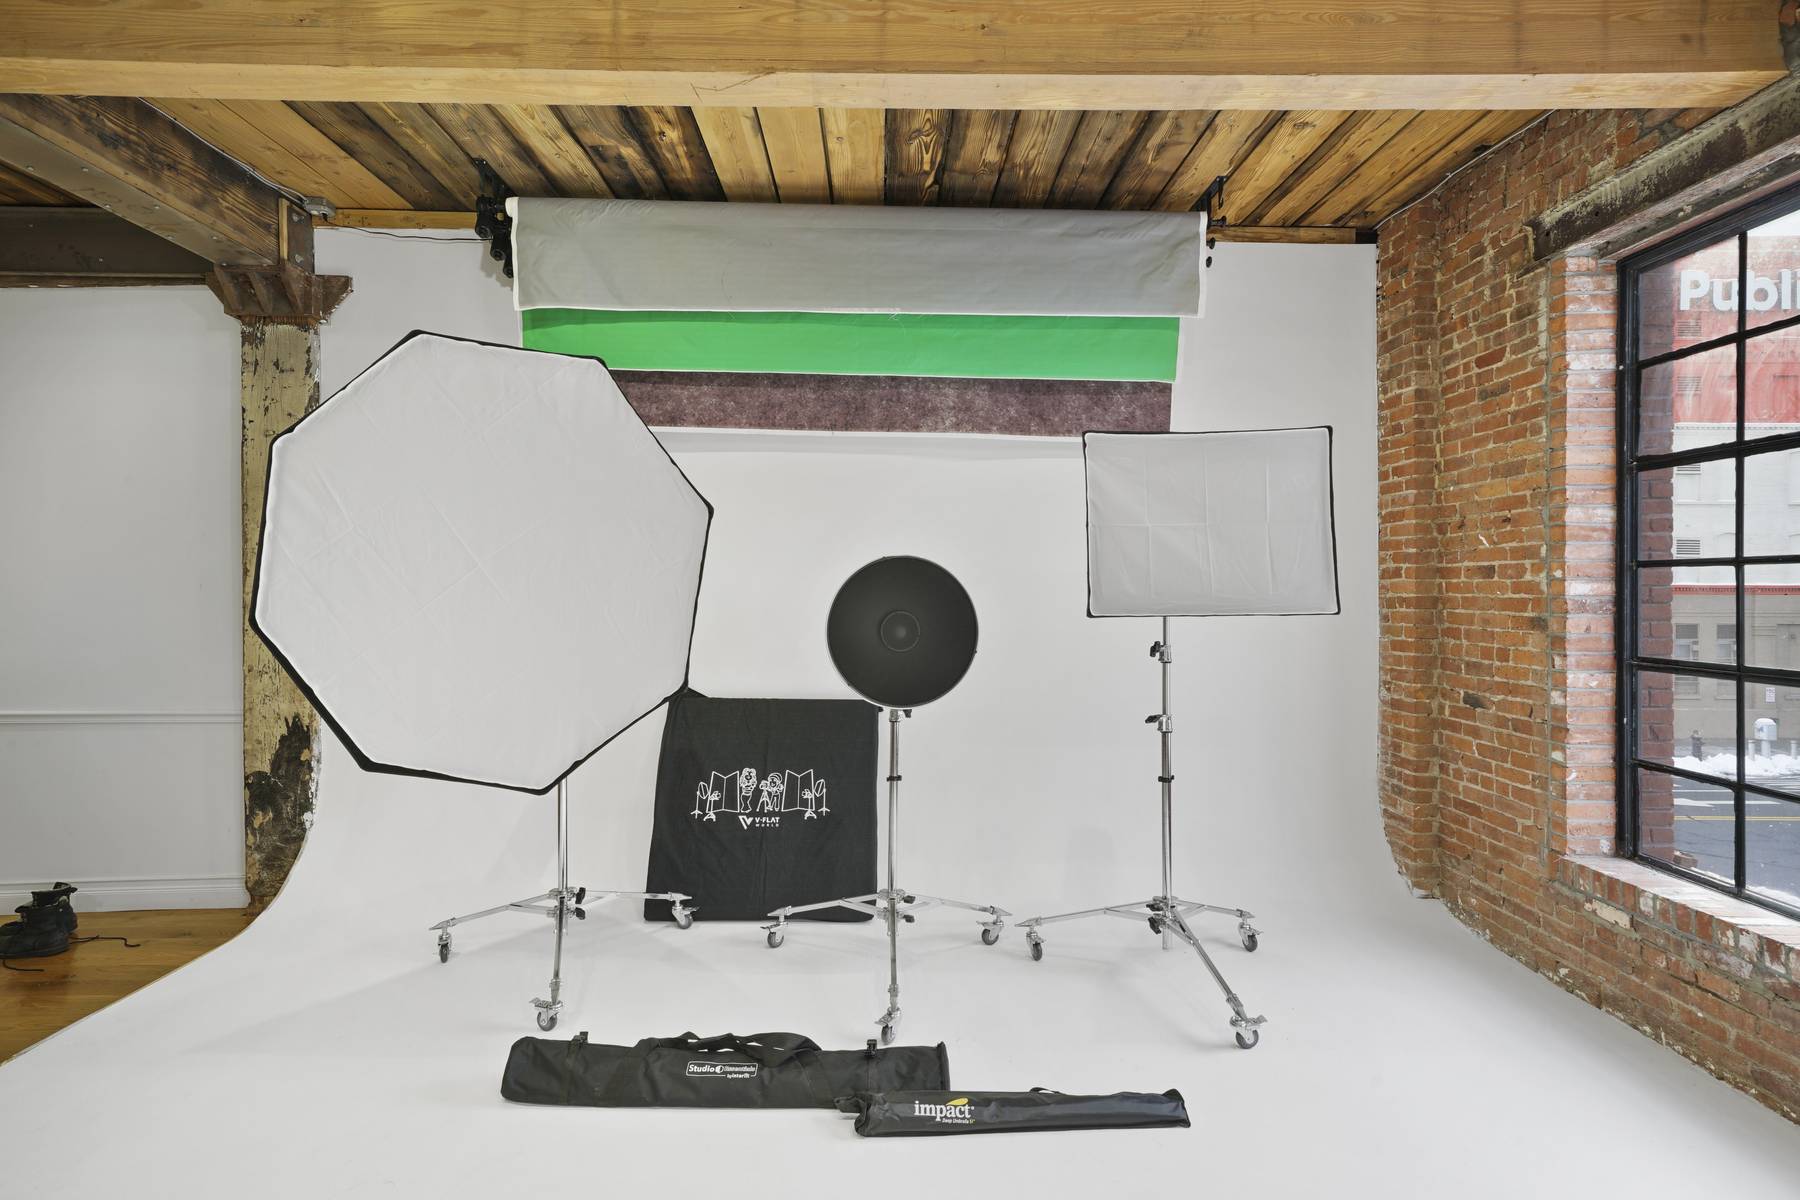 lighting equipment in a white cyclorama